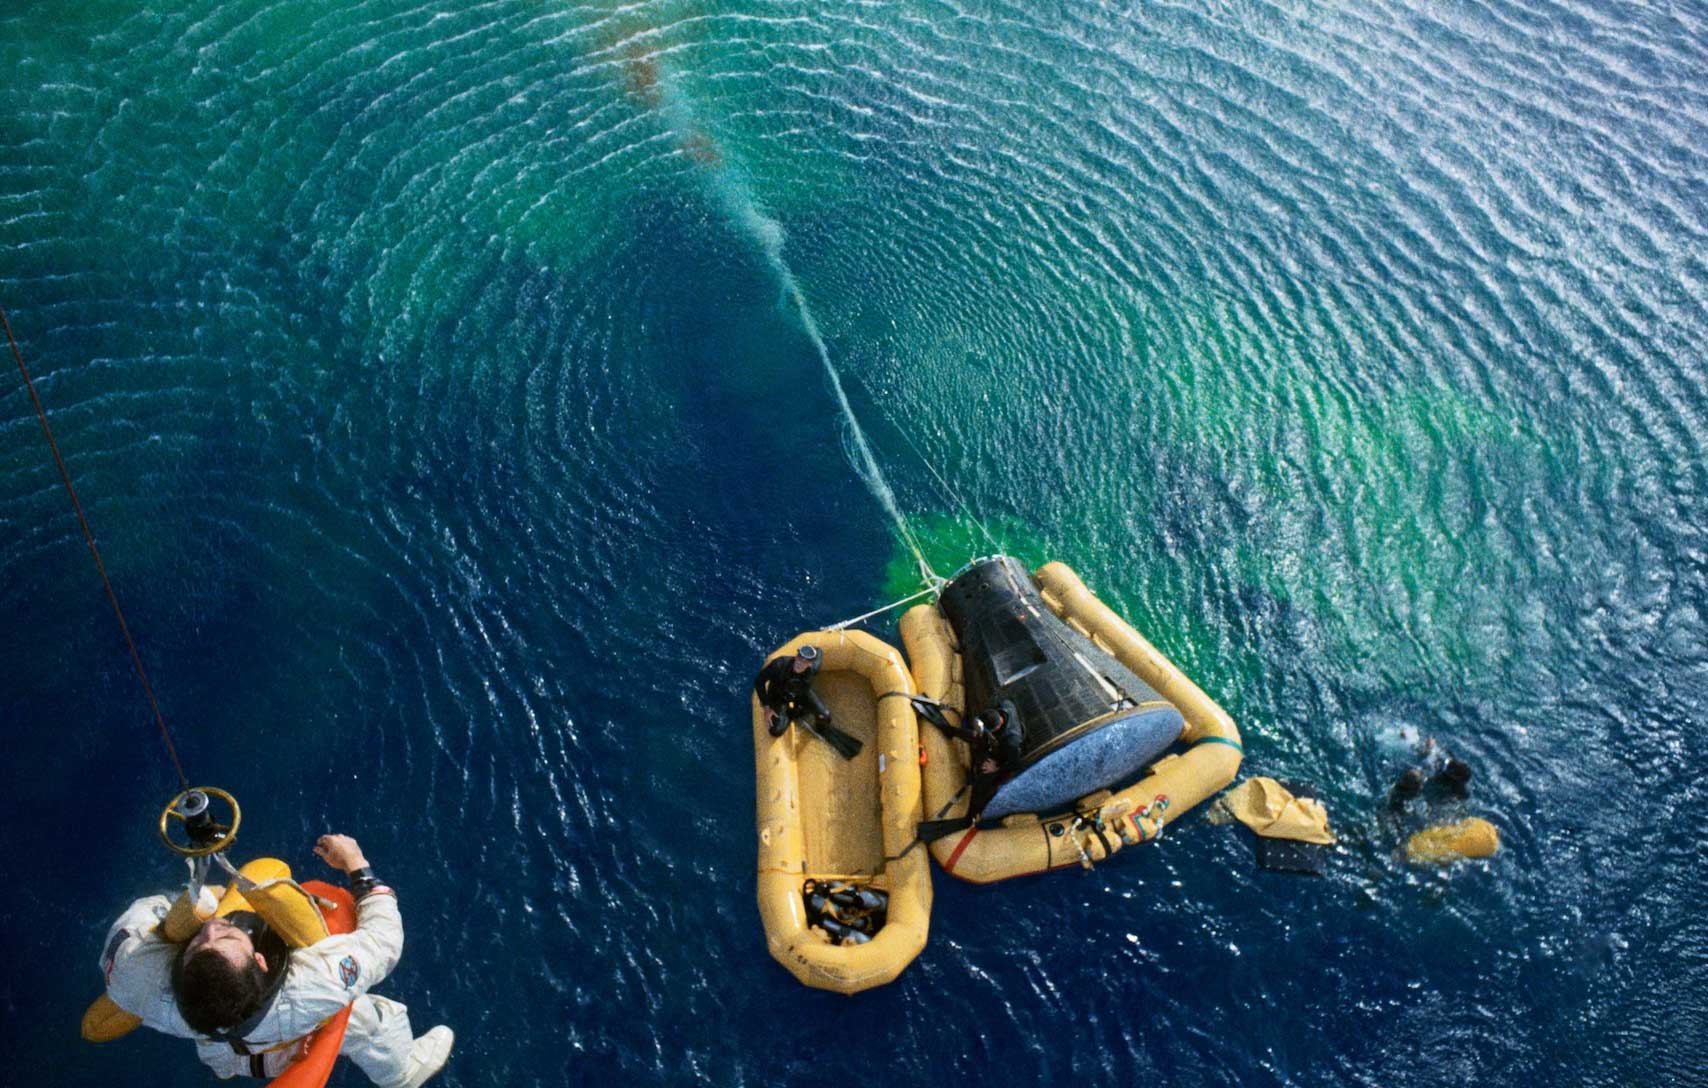 NASA Artemis I Mission Official Splashes Down And Re-Entry